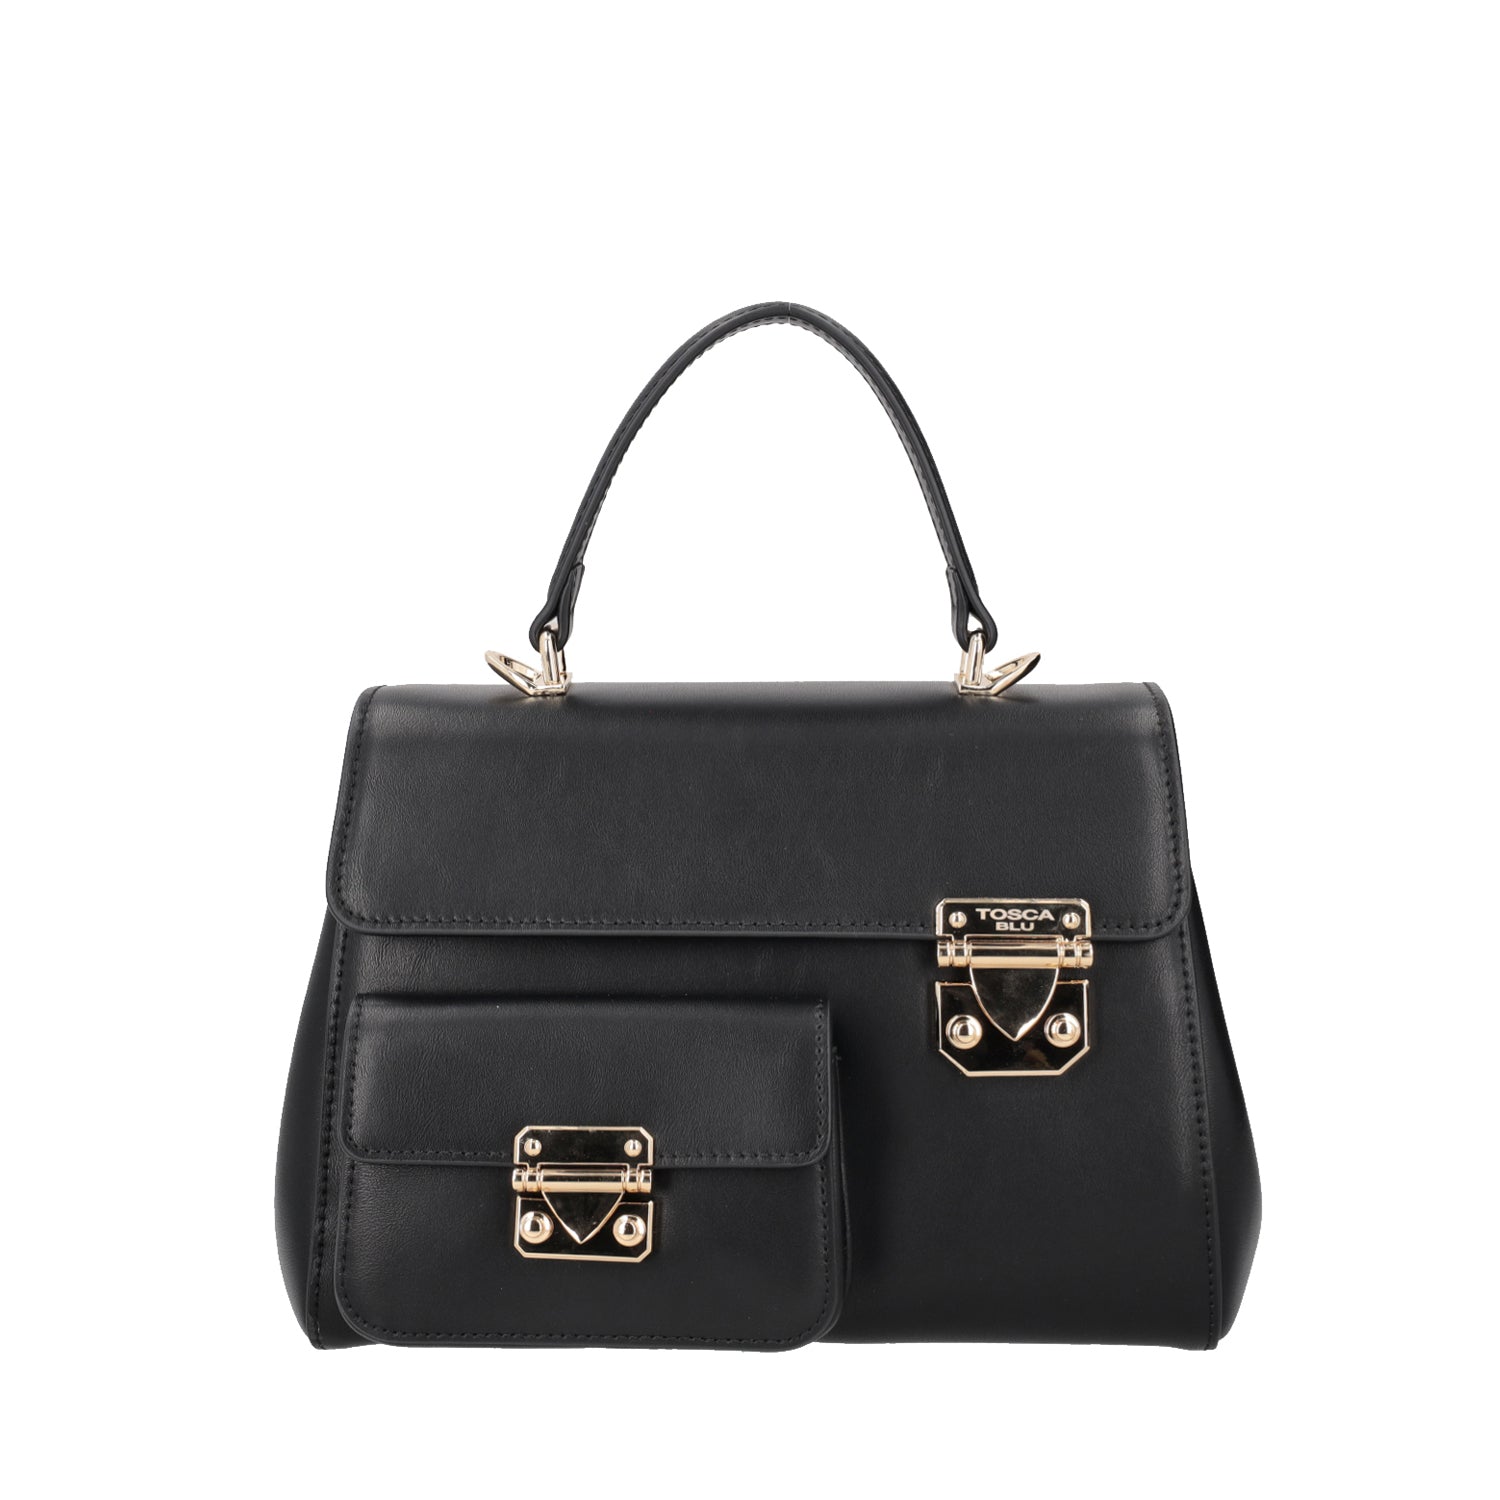 Women's bags: elegant, practical and colorful | Tosca Blu